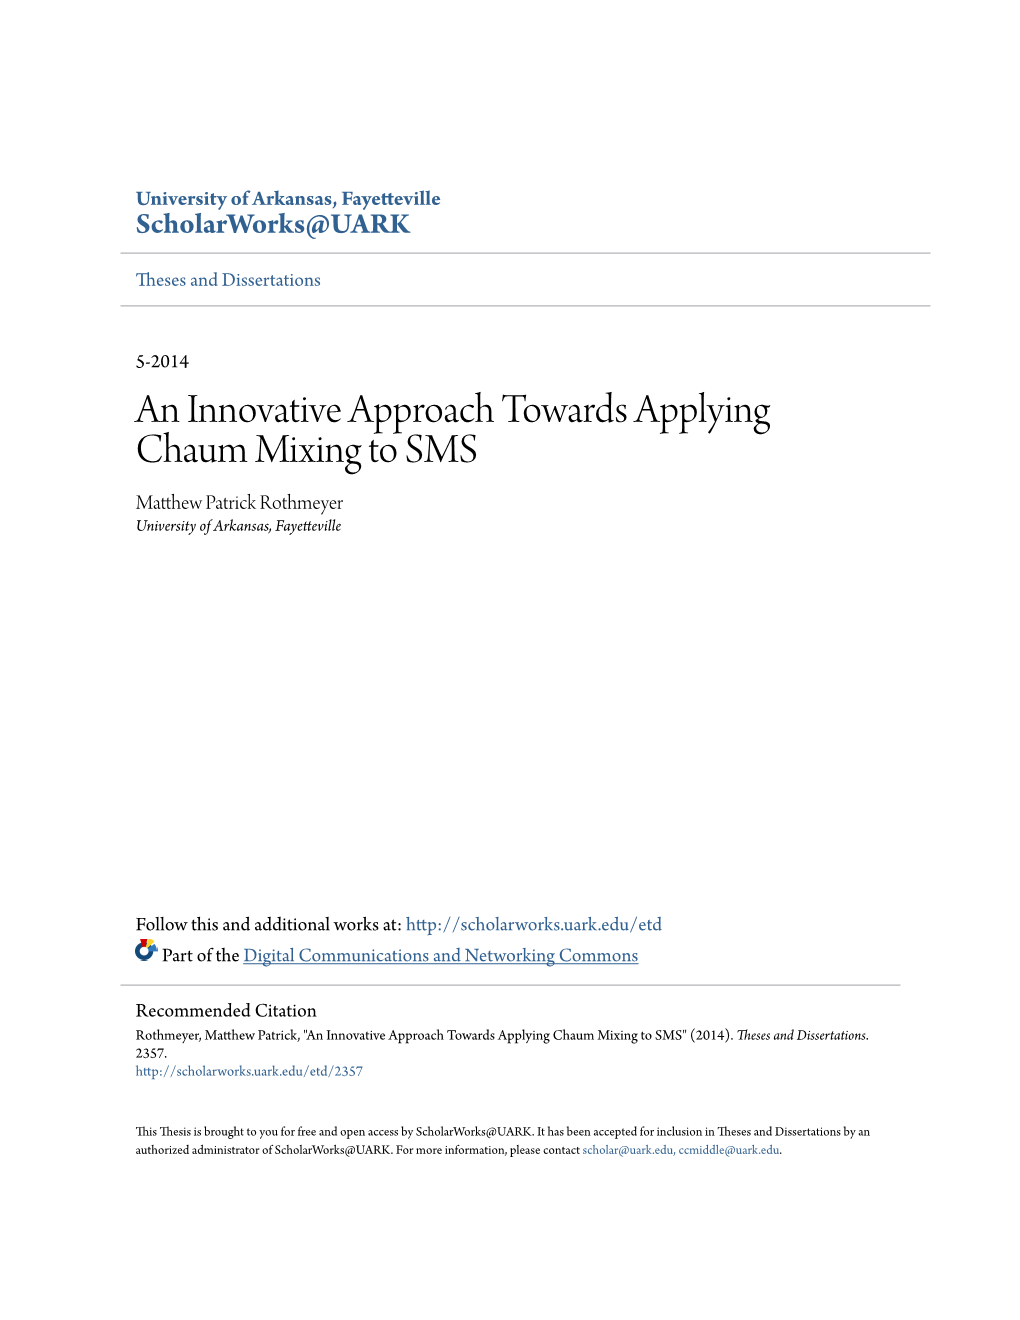 An Innovative Approach Towards Applying Chaum Mixing to SMS Matthew Ap Trick Rothmeyer University of Arkansas, Fayetteville